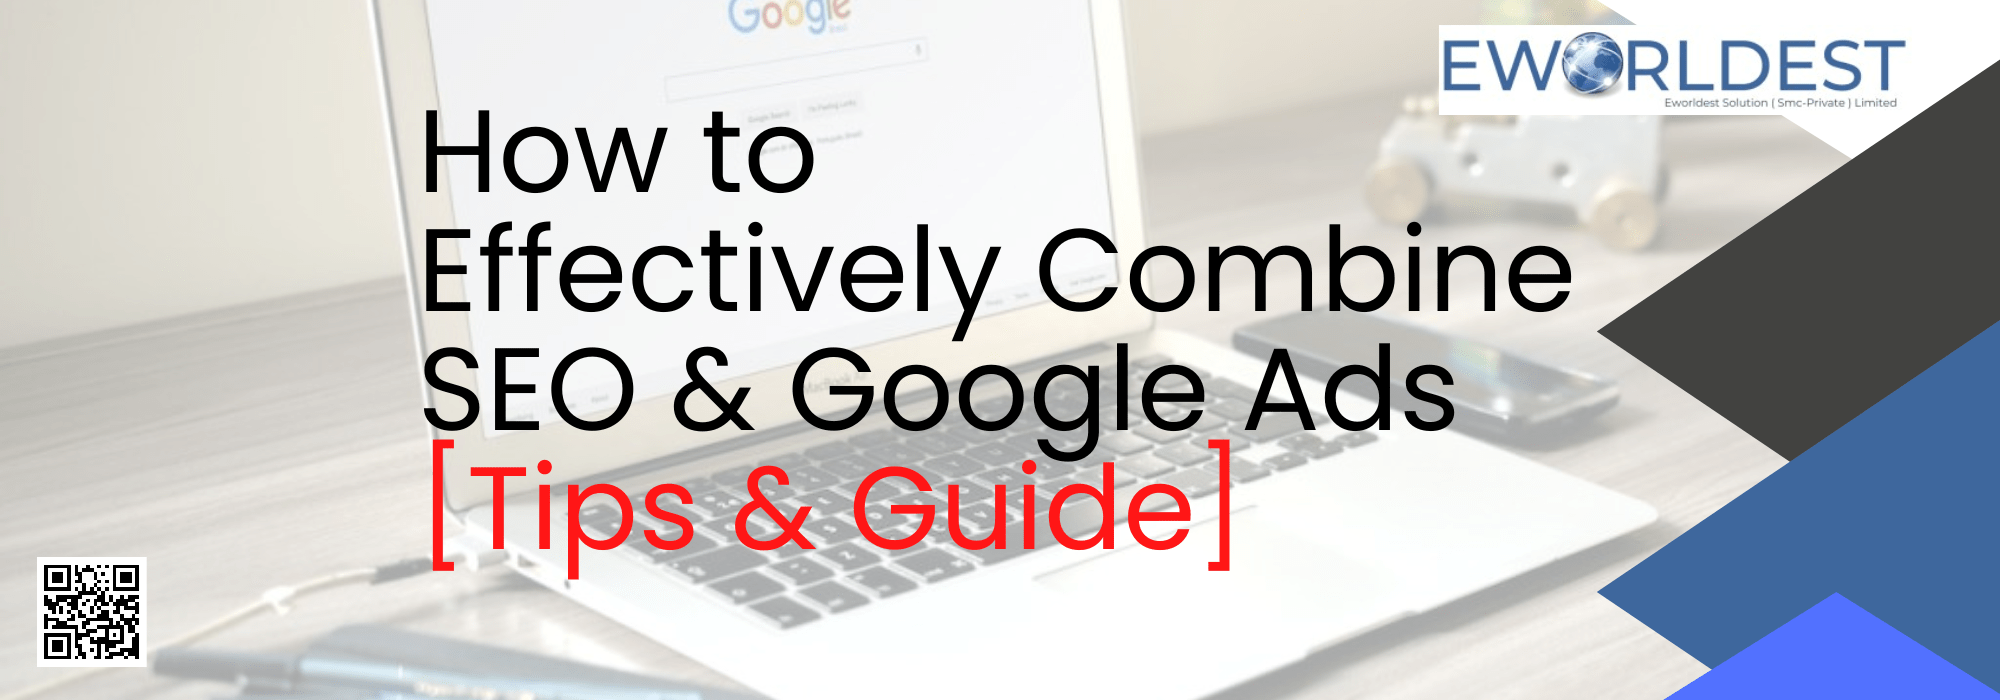 How to Effectively Combine SEO & Google Ads [Tips & Guide]